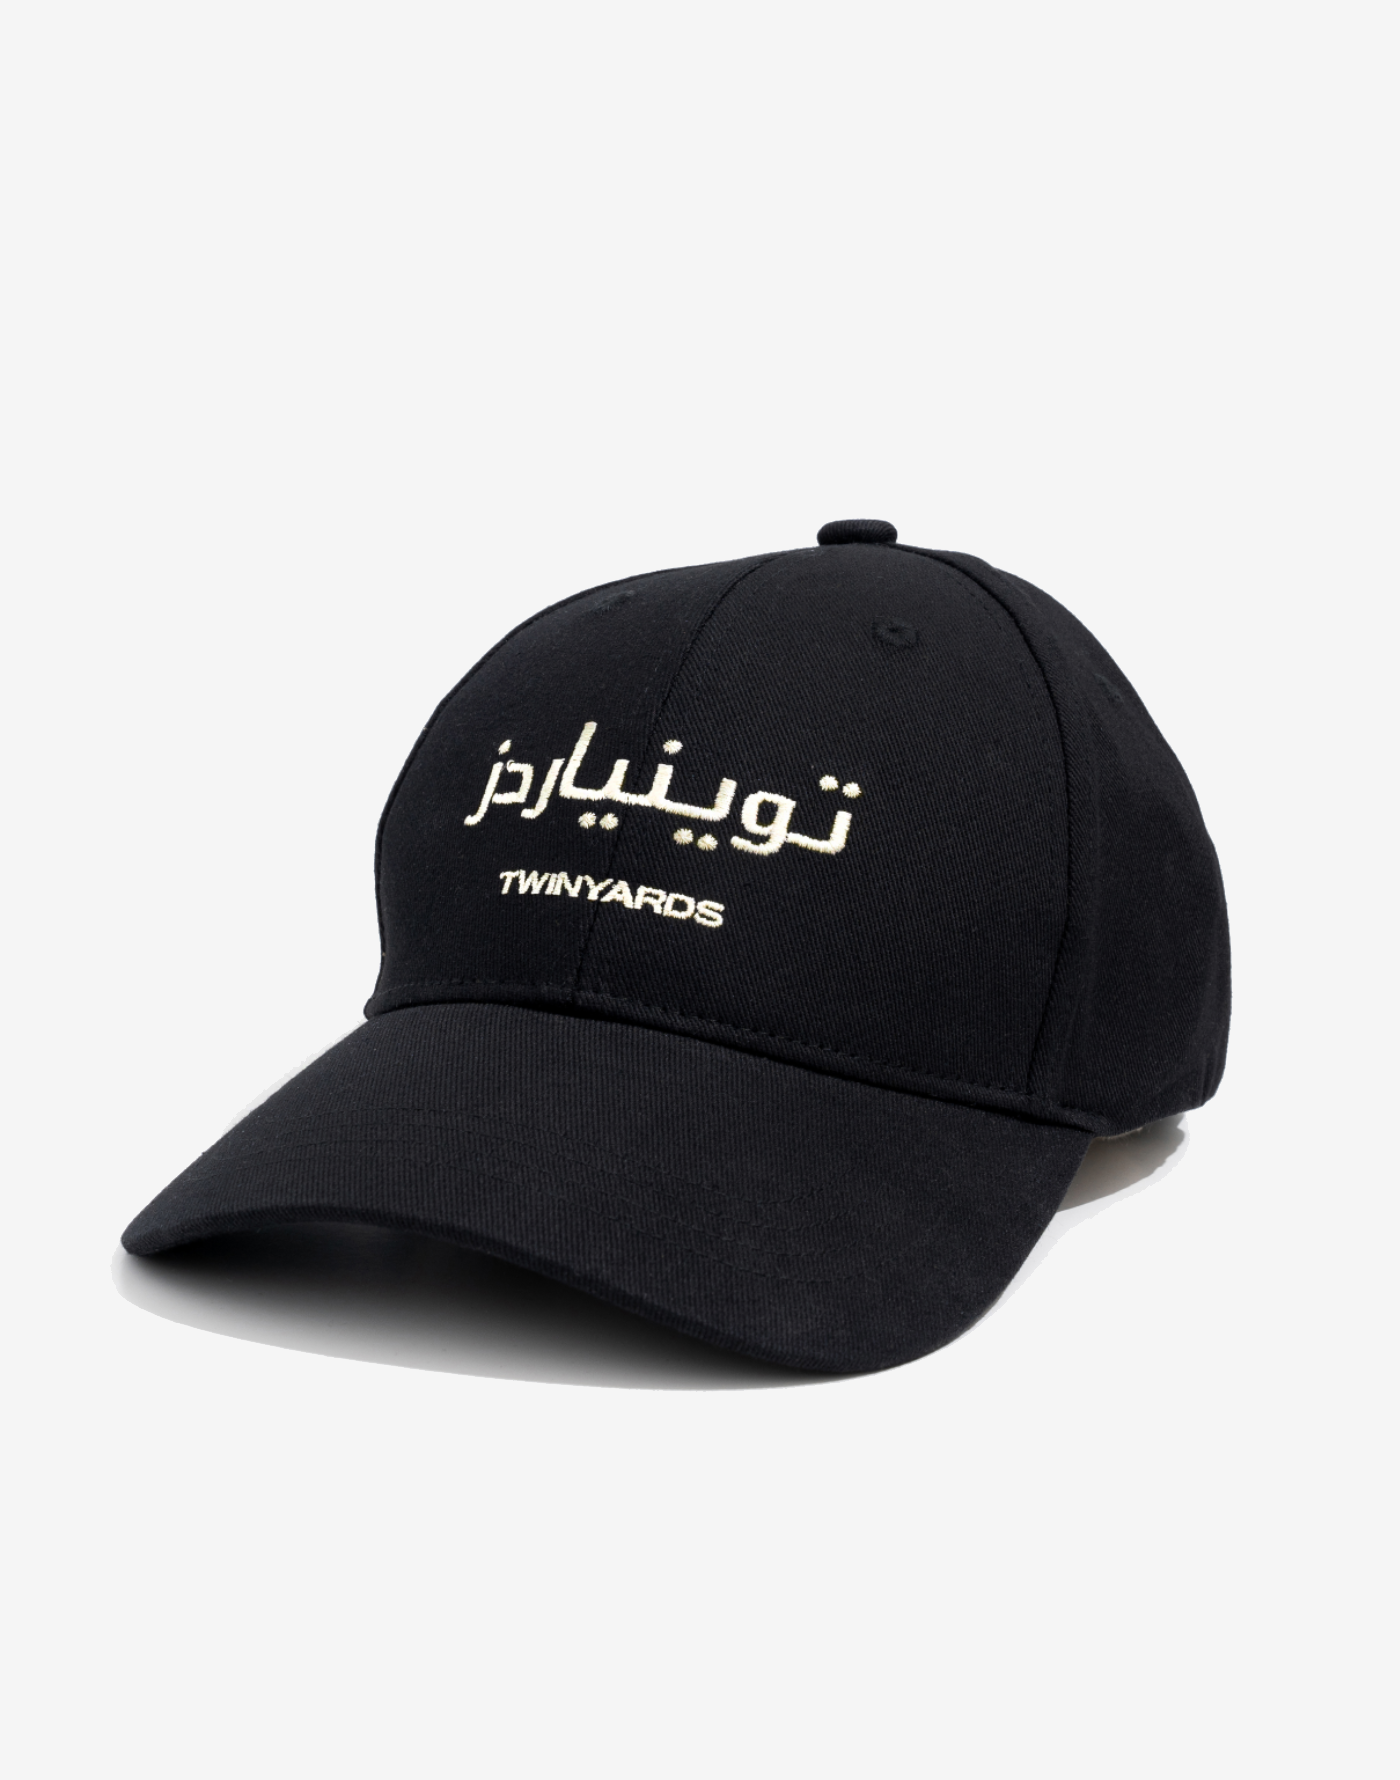 Arabic Cap by Twinyards  Free Shipping in the UAE